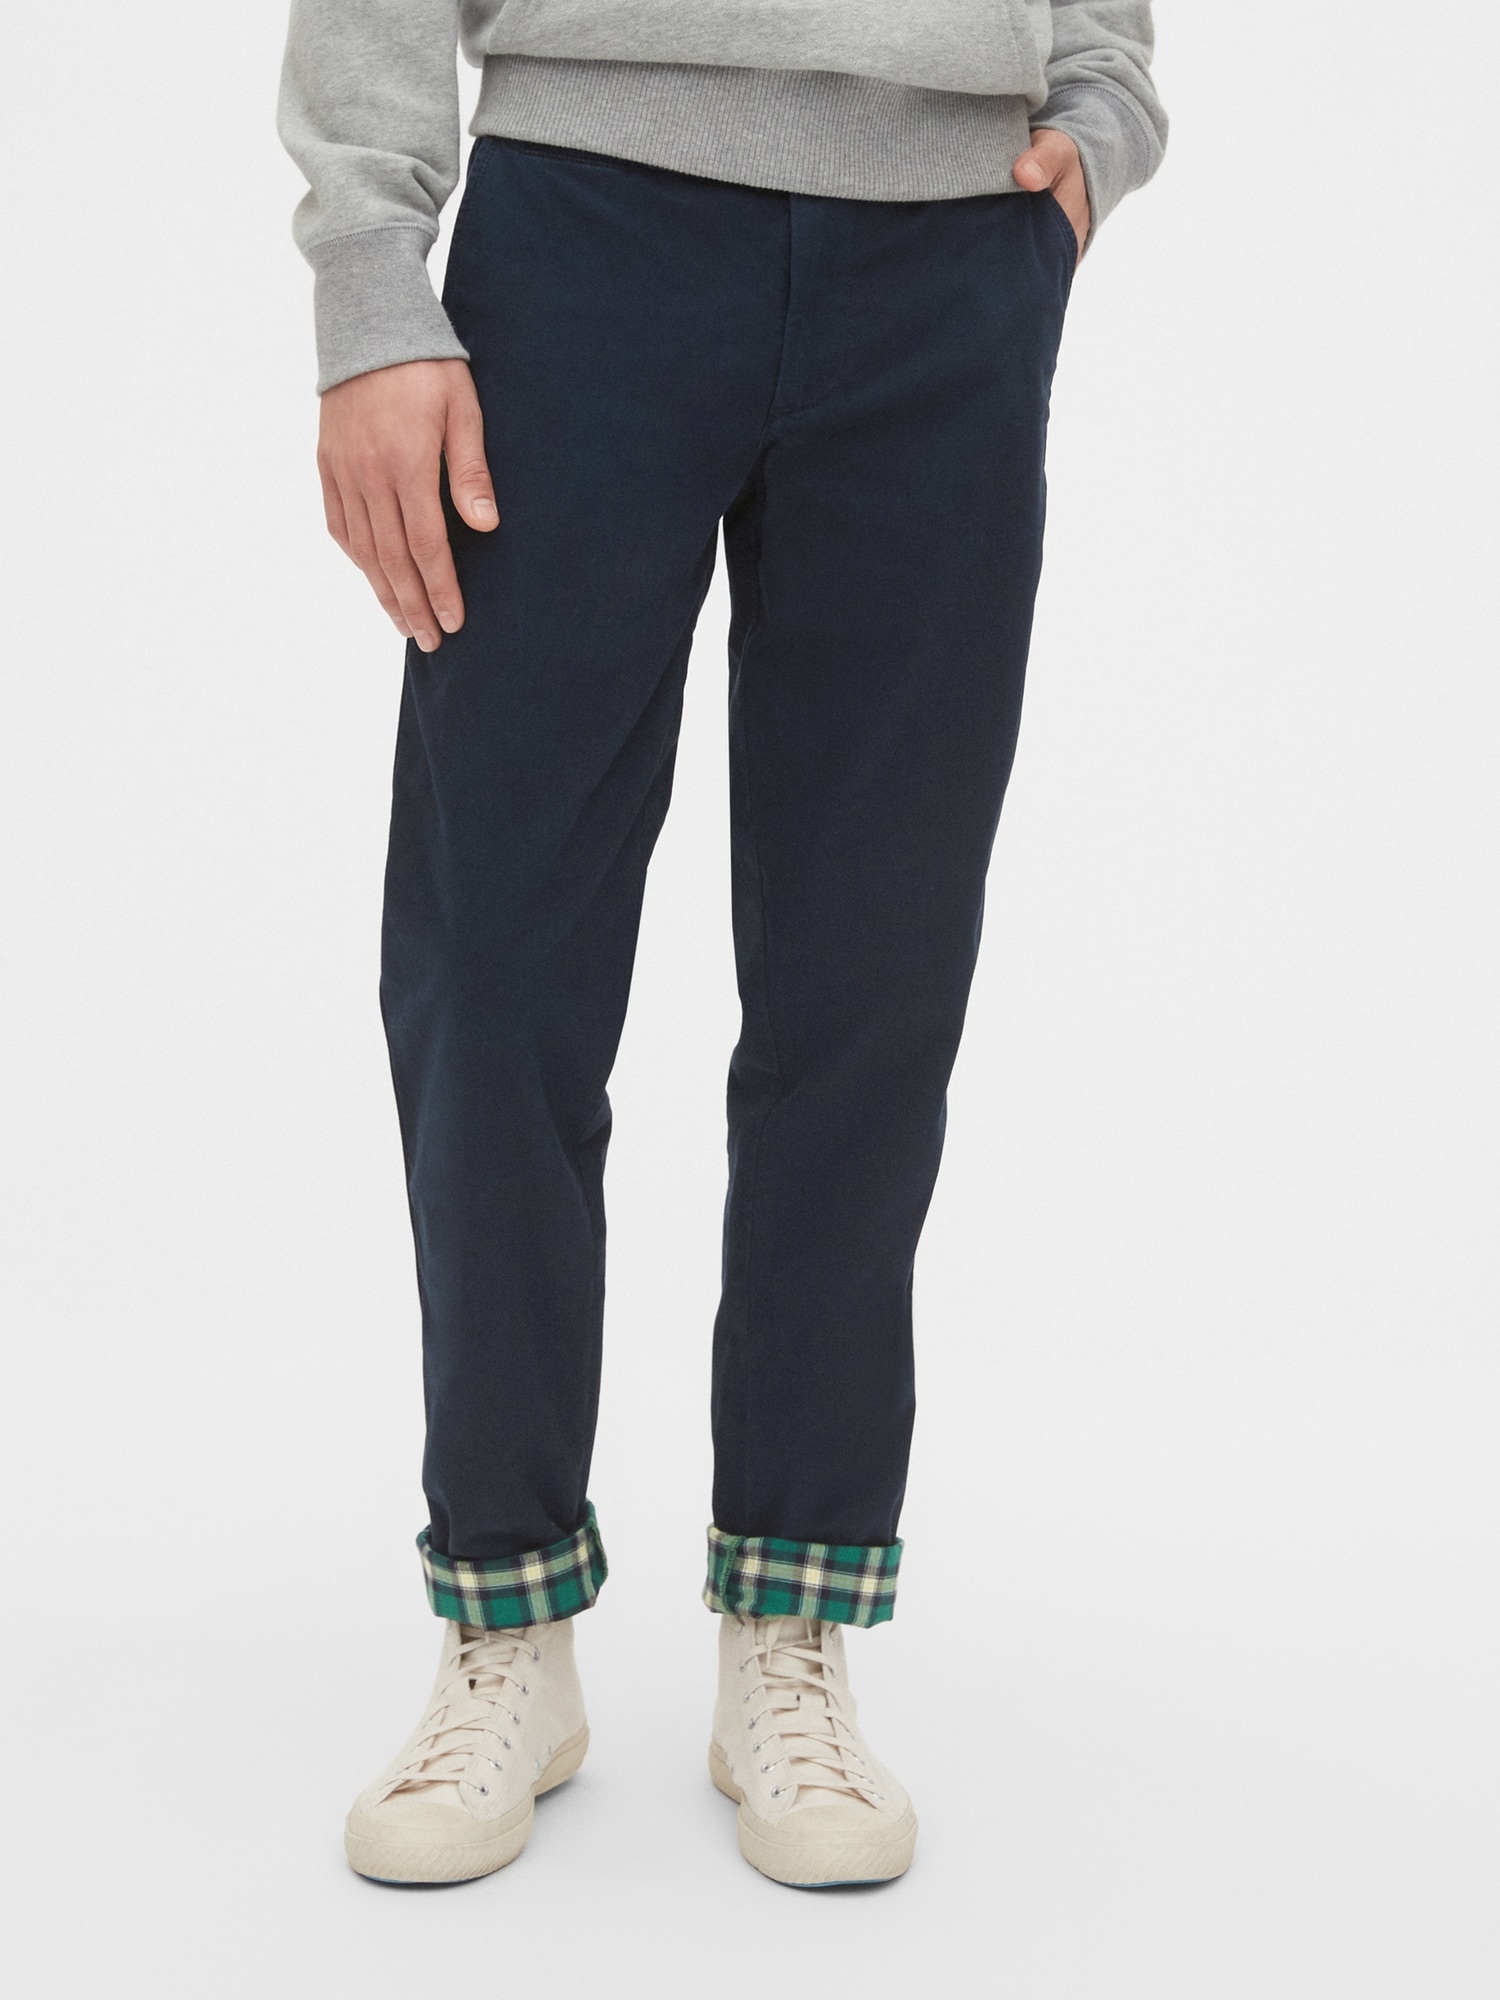 Flannel-Lined Khakis in Slim Fit with 